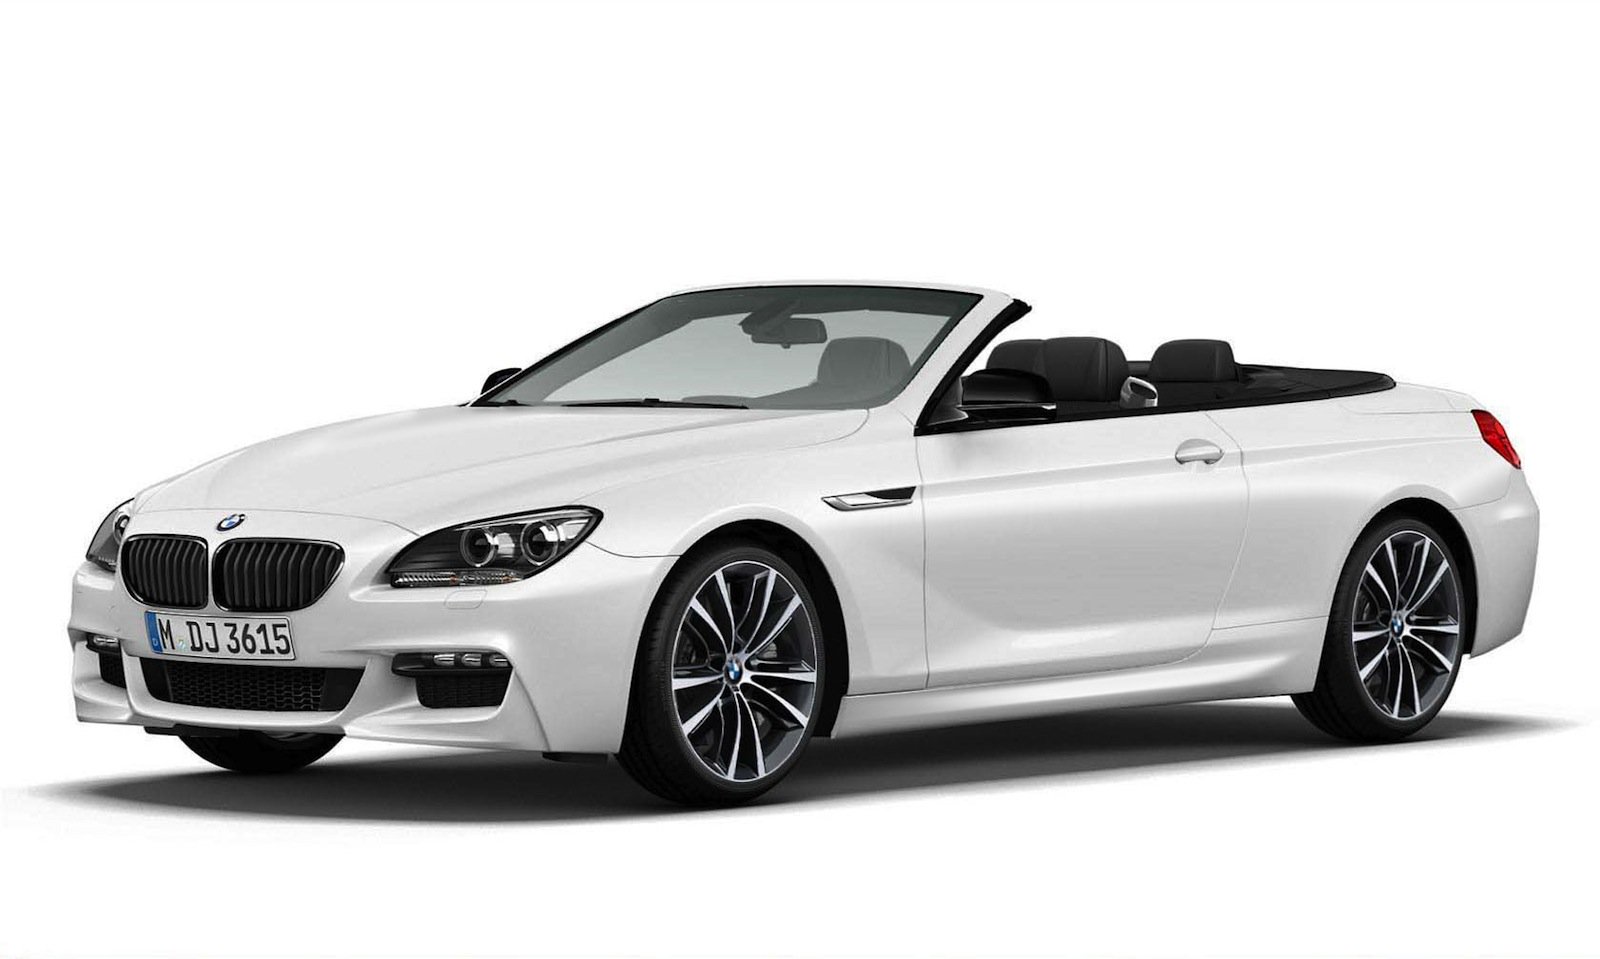 BMW 6 Series II (E63/E64) Restyling 2007 - 2010 Cabriolet #5